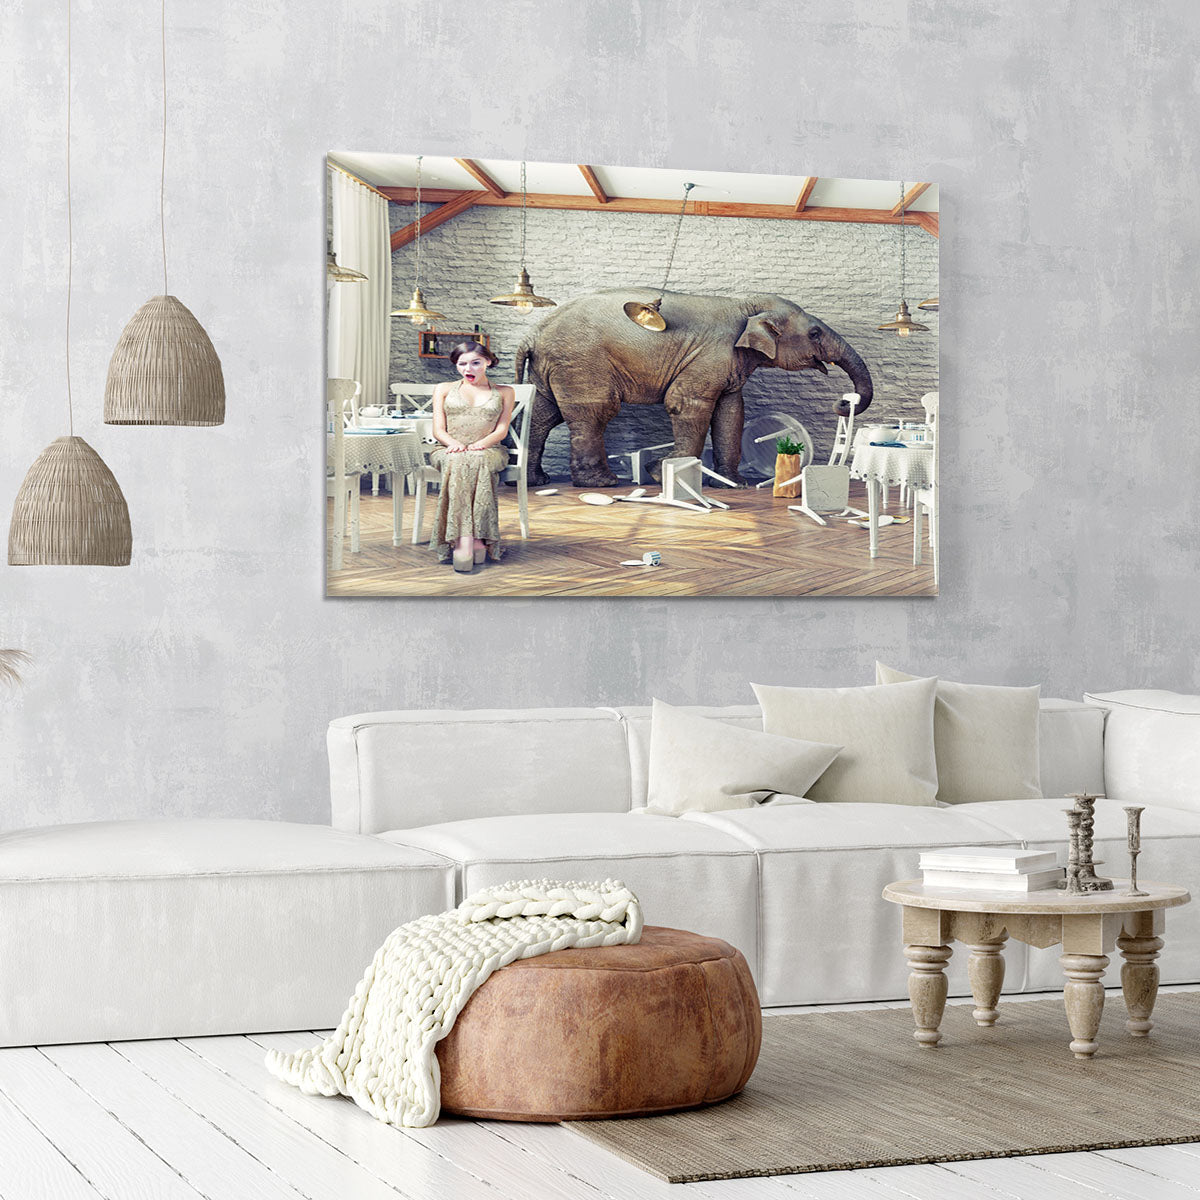 The elephant calm in a restaurant interior. photo combination concept Canvas Print or Poster - Canvas Art Rocks - 6